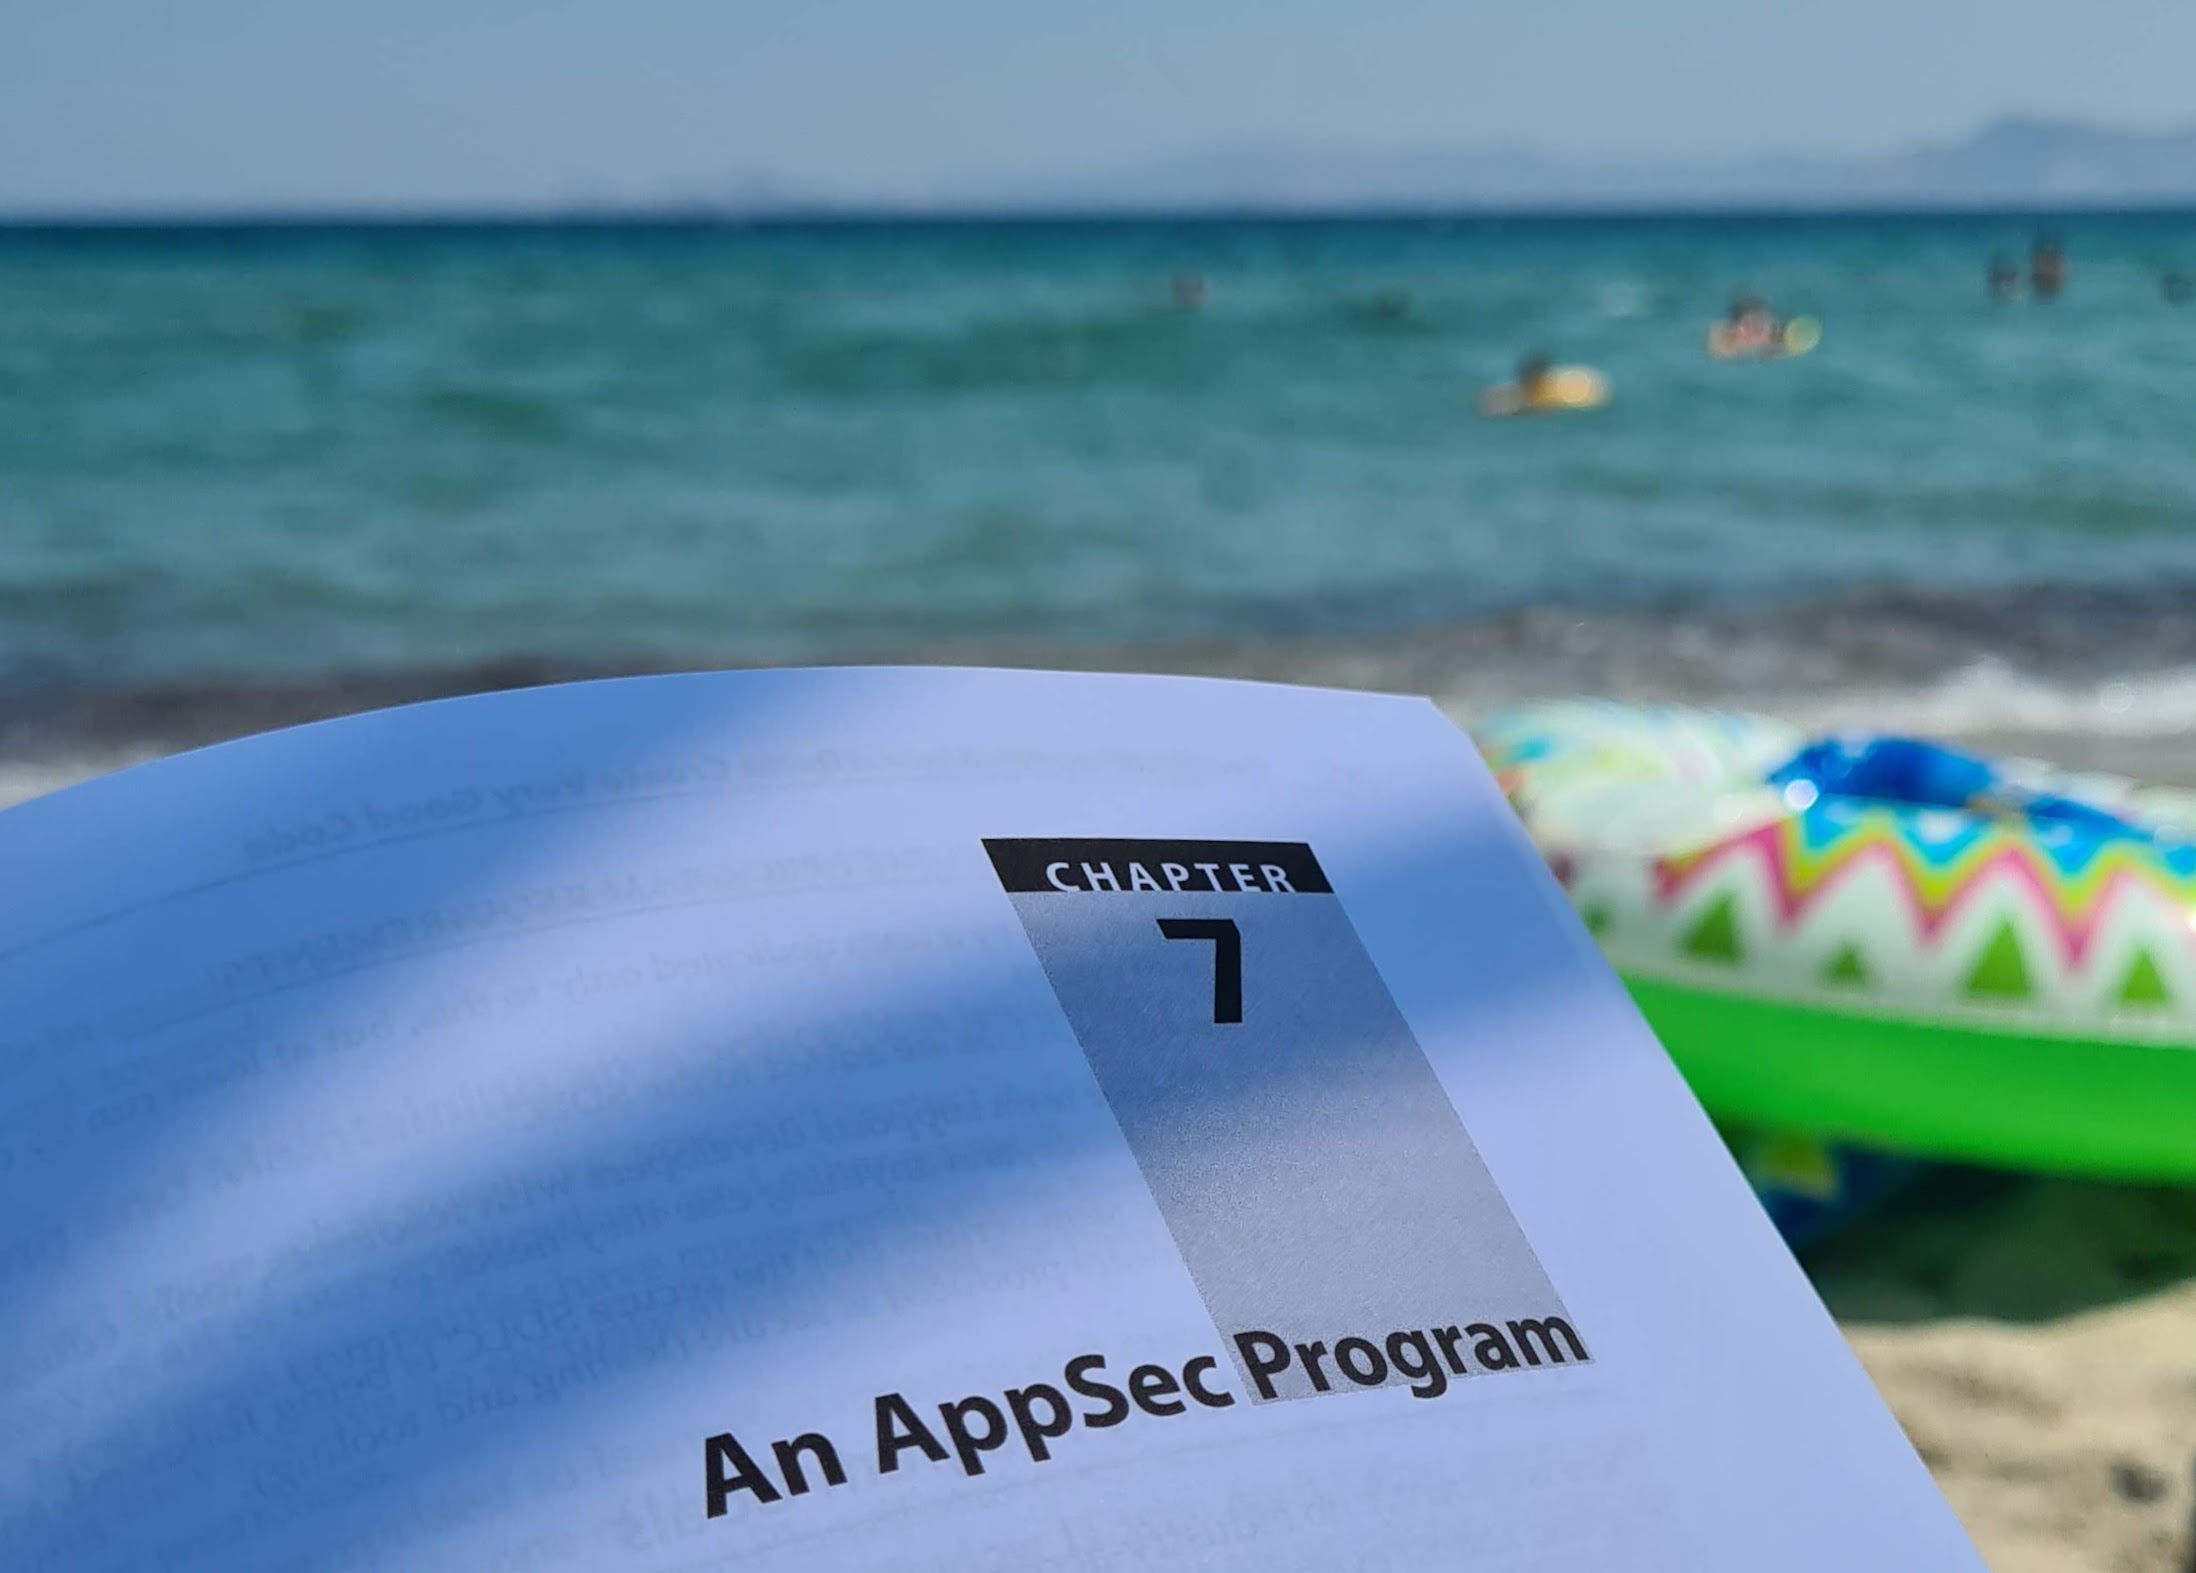 Learning about AppSec at the beach of Kos. The Sea and playing kids in the background